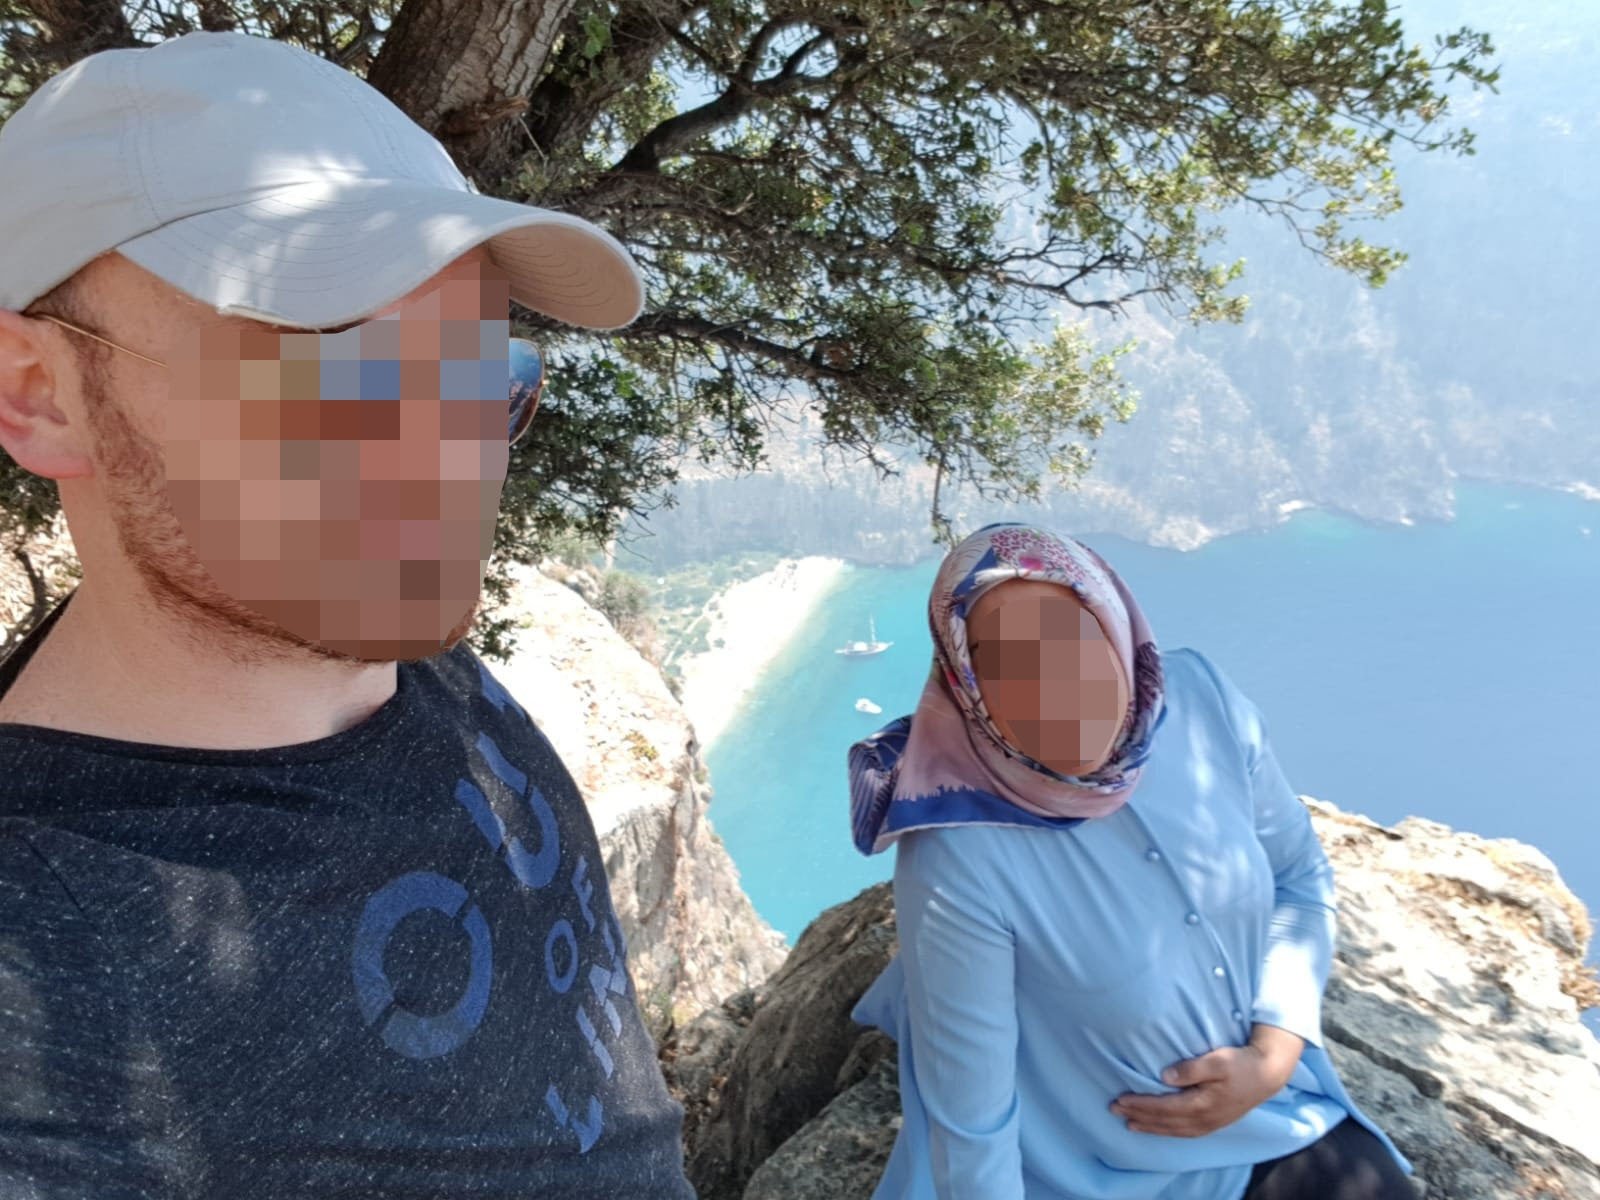 This undated photo shows the victim and her husband at the spot where the victim fell to her death, in Muğla, southwestern Turkey. (SABAH PHOTO)